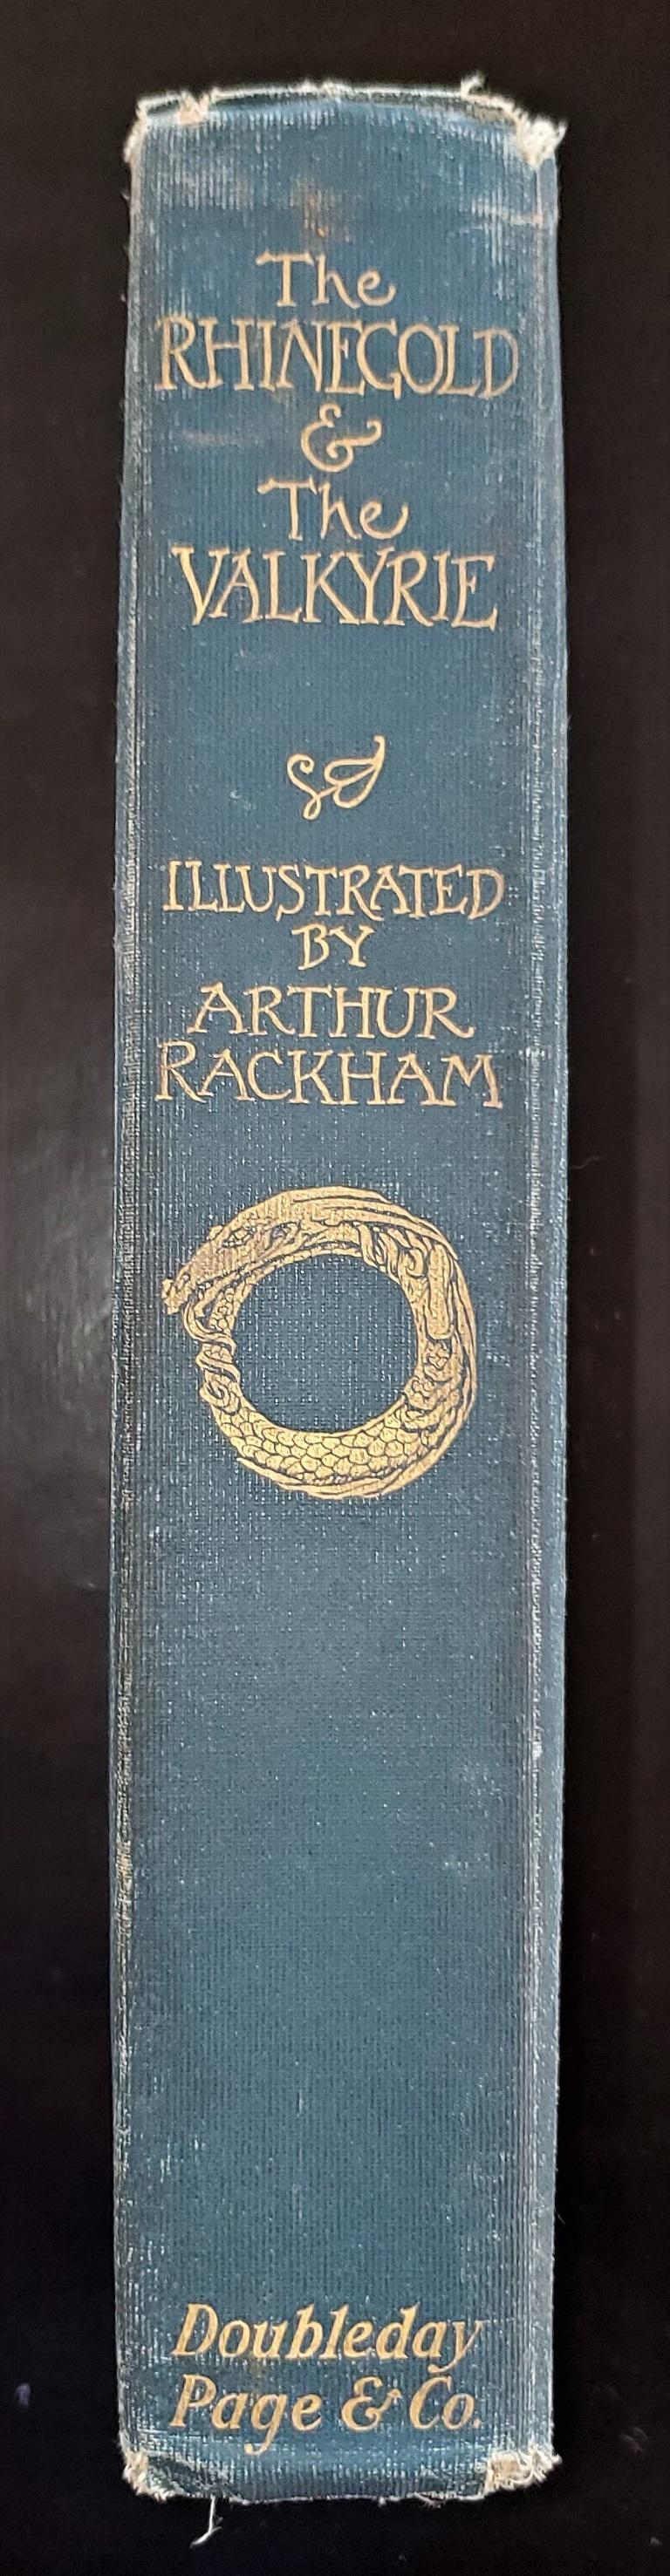 The Rhinegold and The Valkyrie Illustrated by A Rackham First Edition For Sale 6